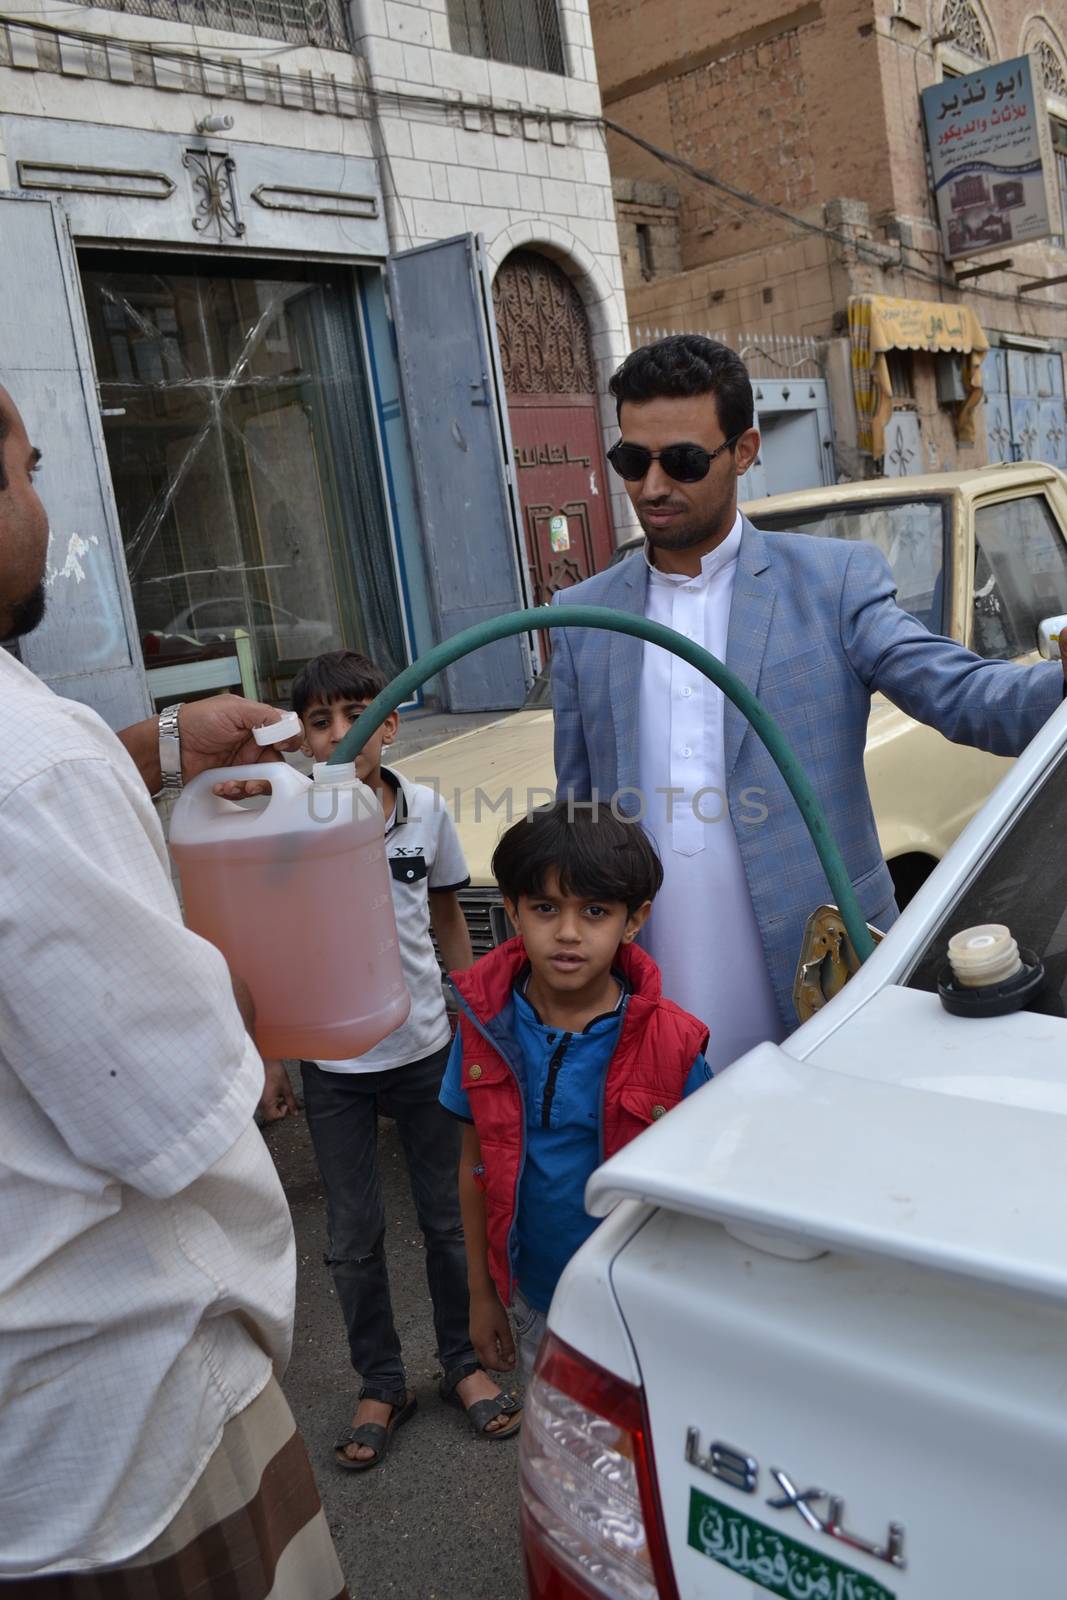 YEMEN, Sanaa: A black market dealer sells bottles of petrol in Sanaa, Yemen's capital, on November 7, 2015, as petrol stations have closed since the beginning of the war and Saudi bombings over the country.